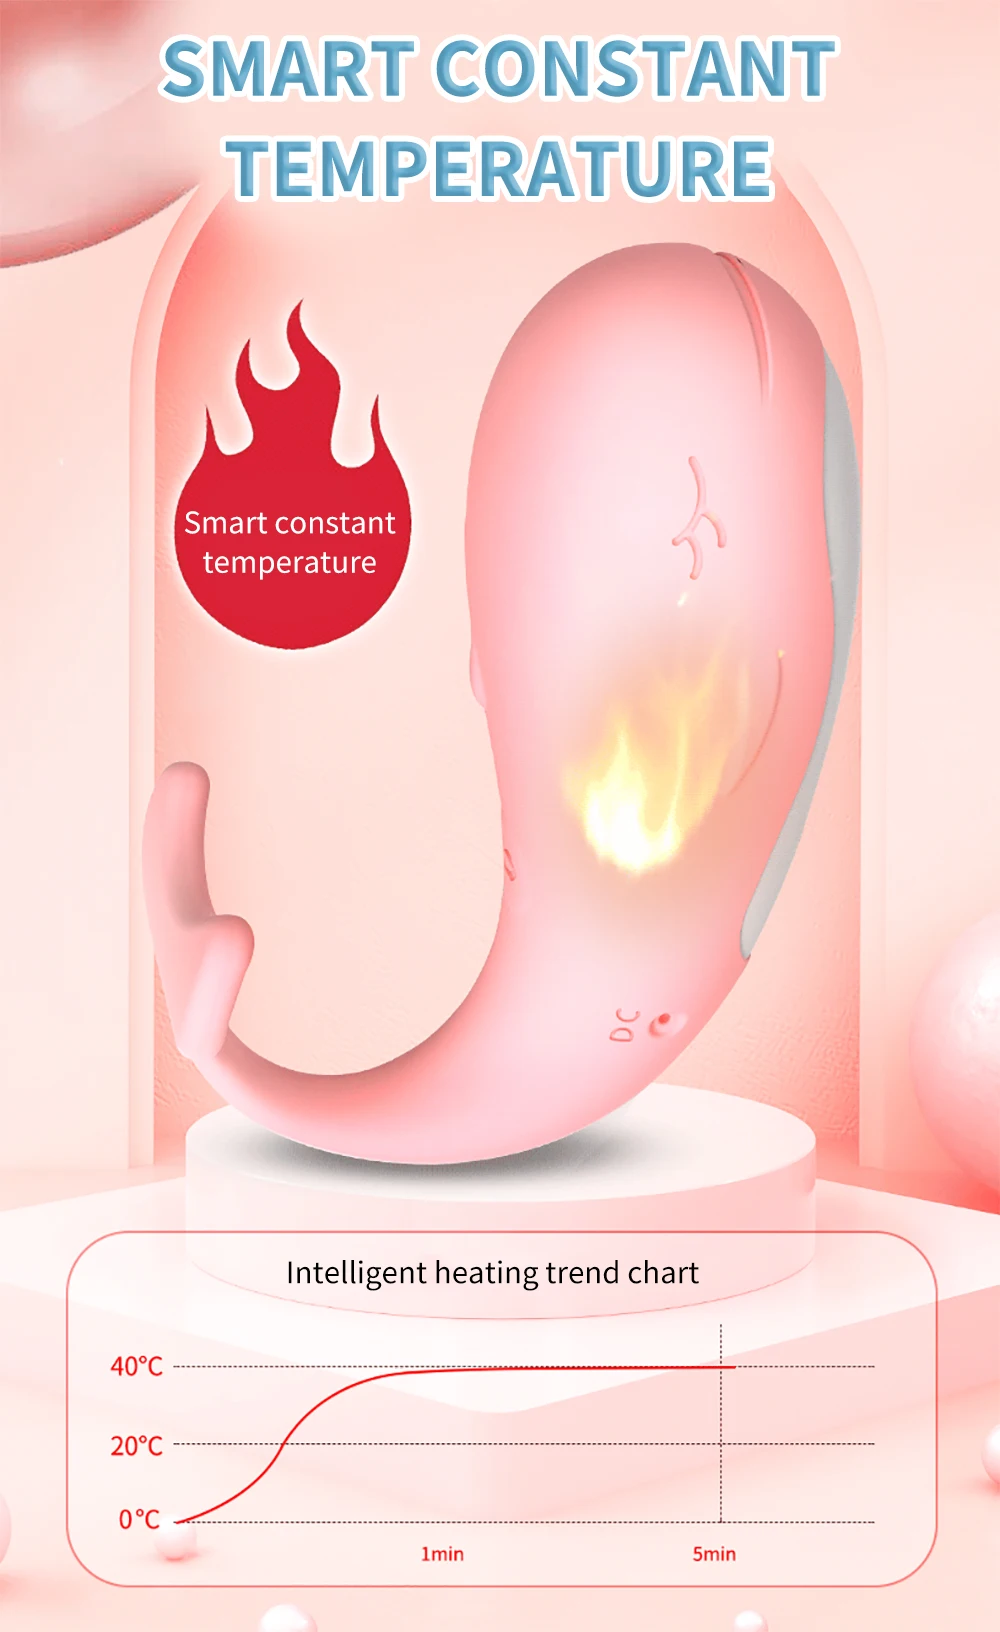 10 Frequency Little Whale Vibrator Remote Control Heating Vibrating Egg Vaginal G-spot Clitoral Stimulator Sex Toys for Women 18 Exporters Sf2020fde5a9443979c6a47ca55d85b2ey